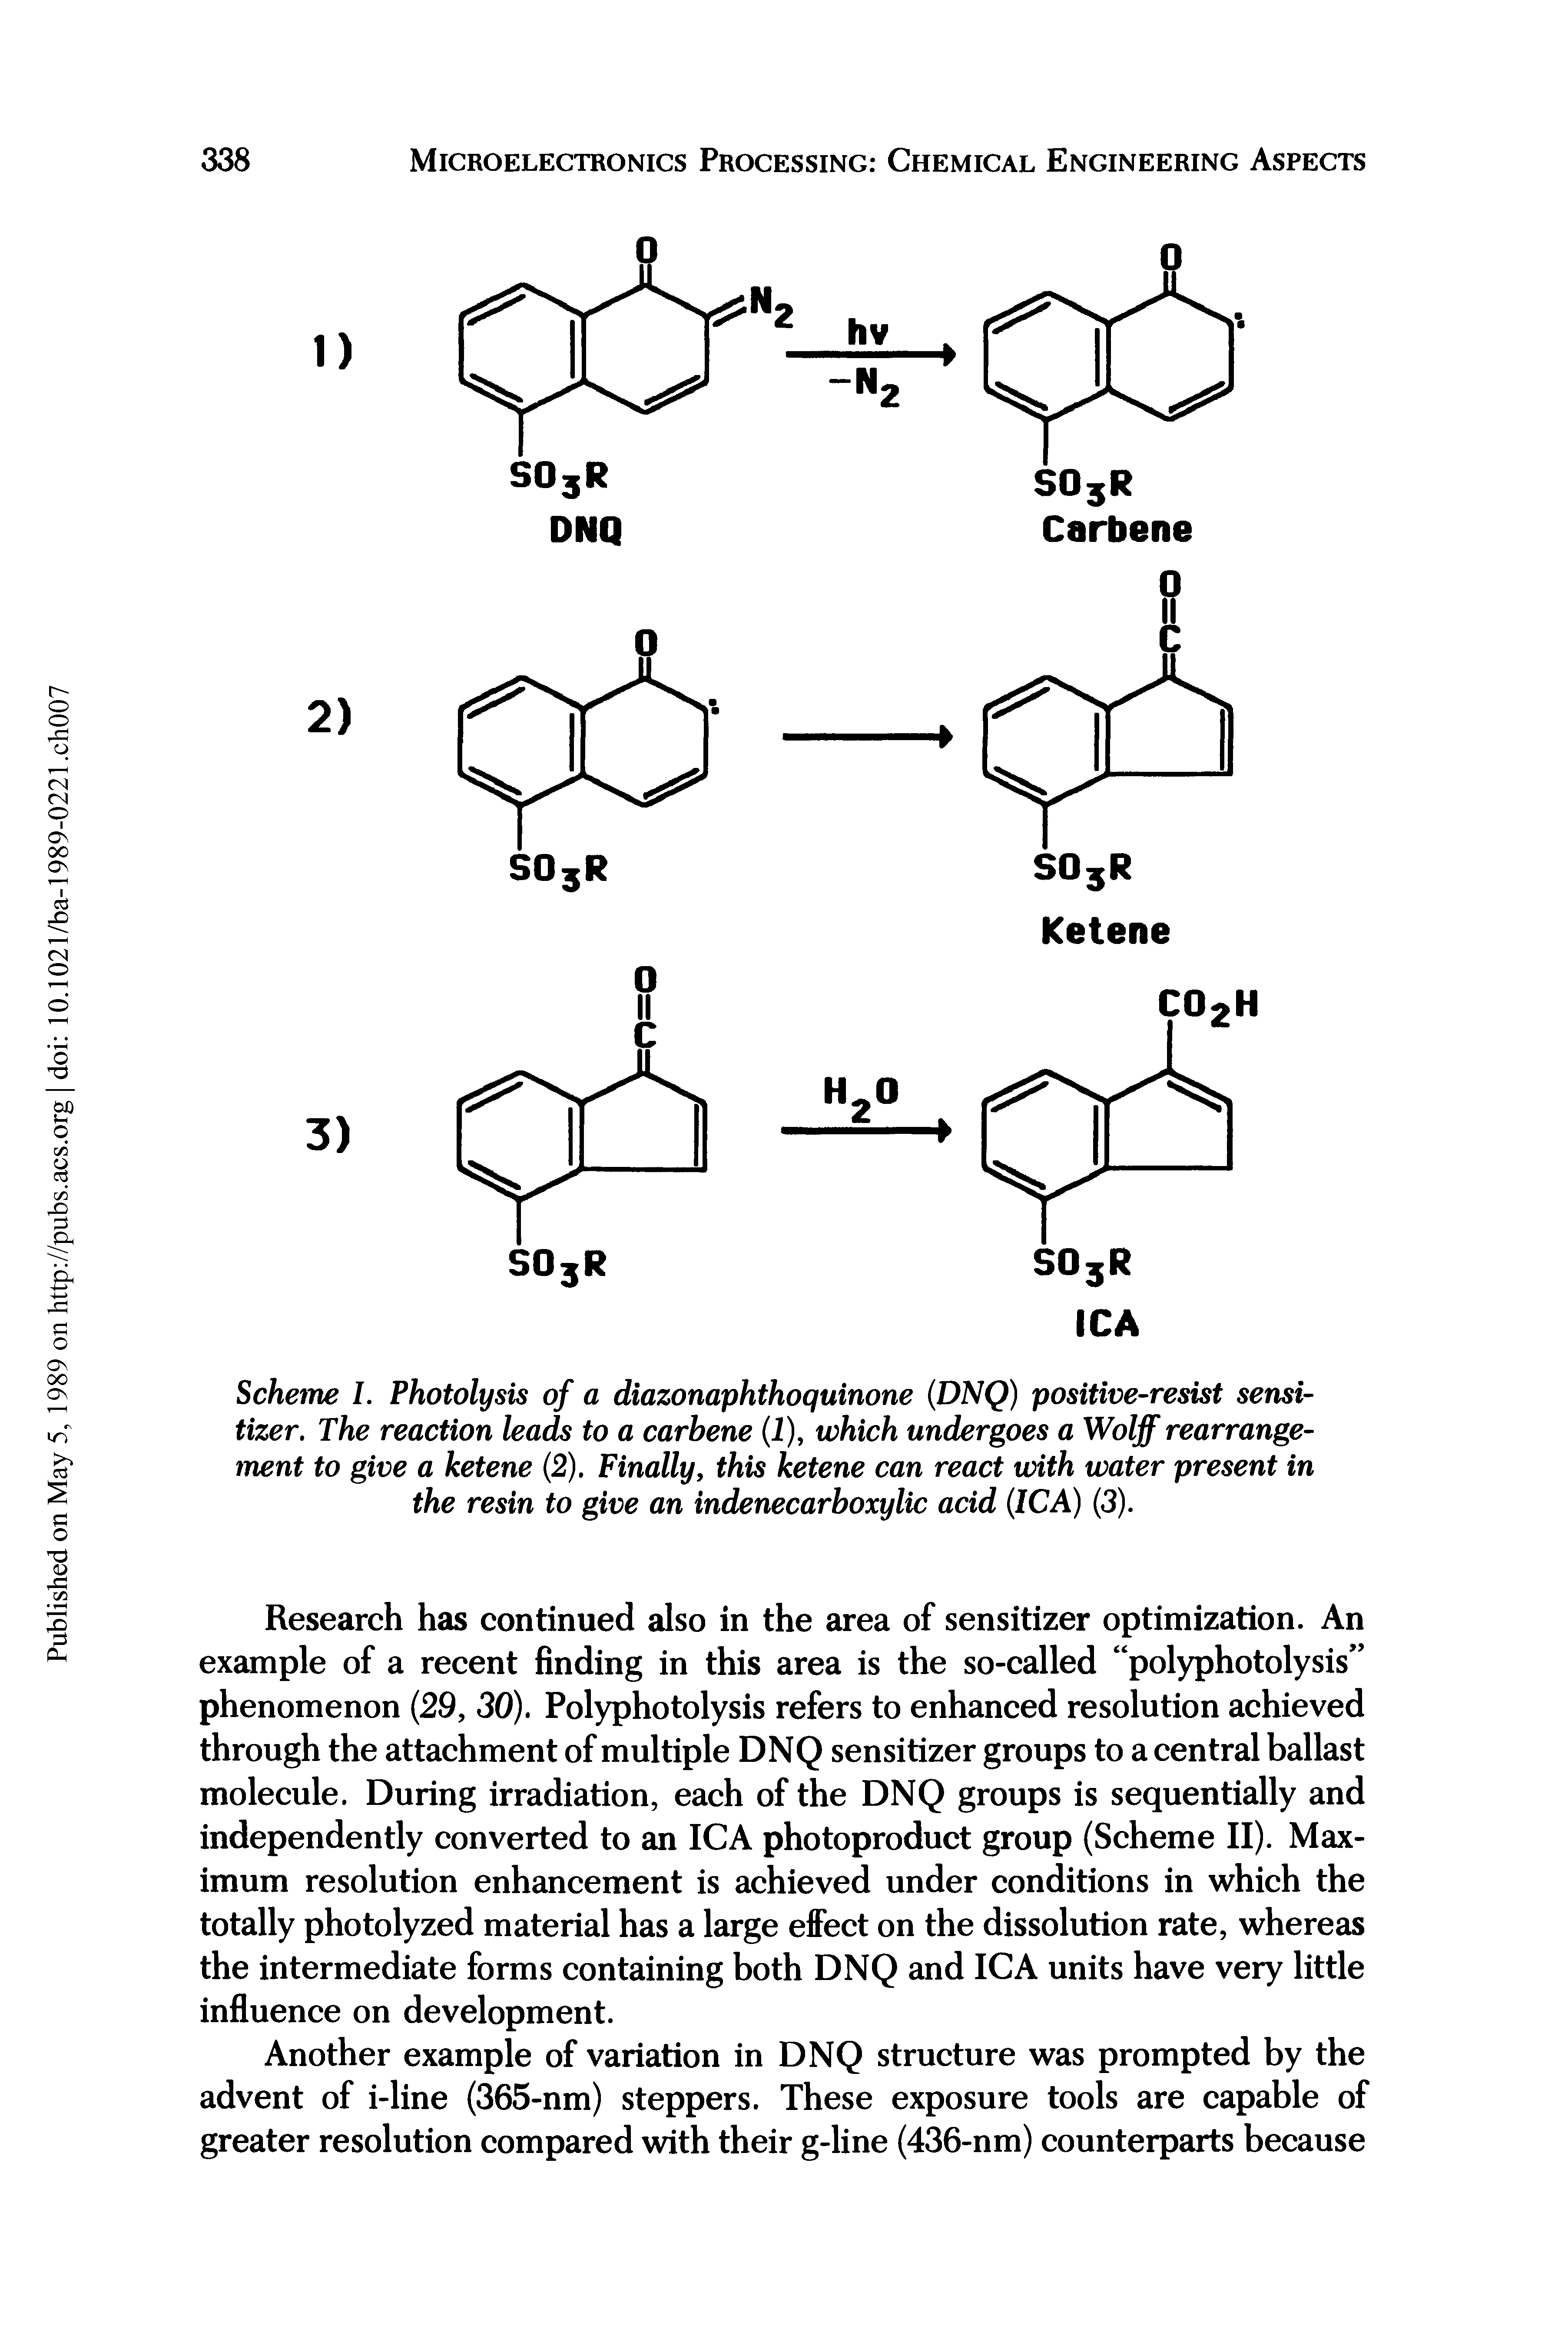 Scheme I. Photolysis of a diazonaphthoquinone (DNQ) positive-resist sensitizer. The reaction leads to a carbene (1), which undergoes a Wolff rearrangement to give a ketene (2). Finally, this ketene can react with water present in the resin to give an indenecarboxylic acid (ICA) (3).